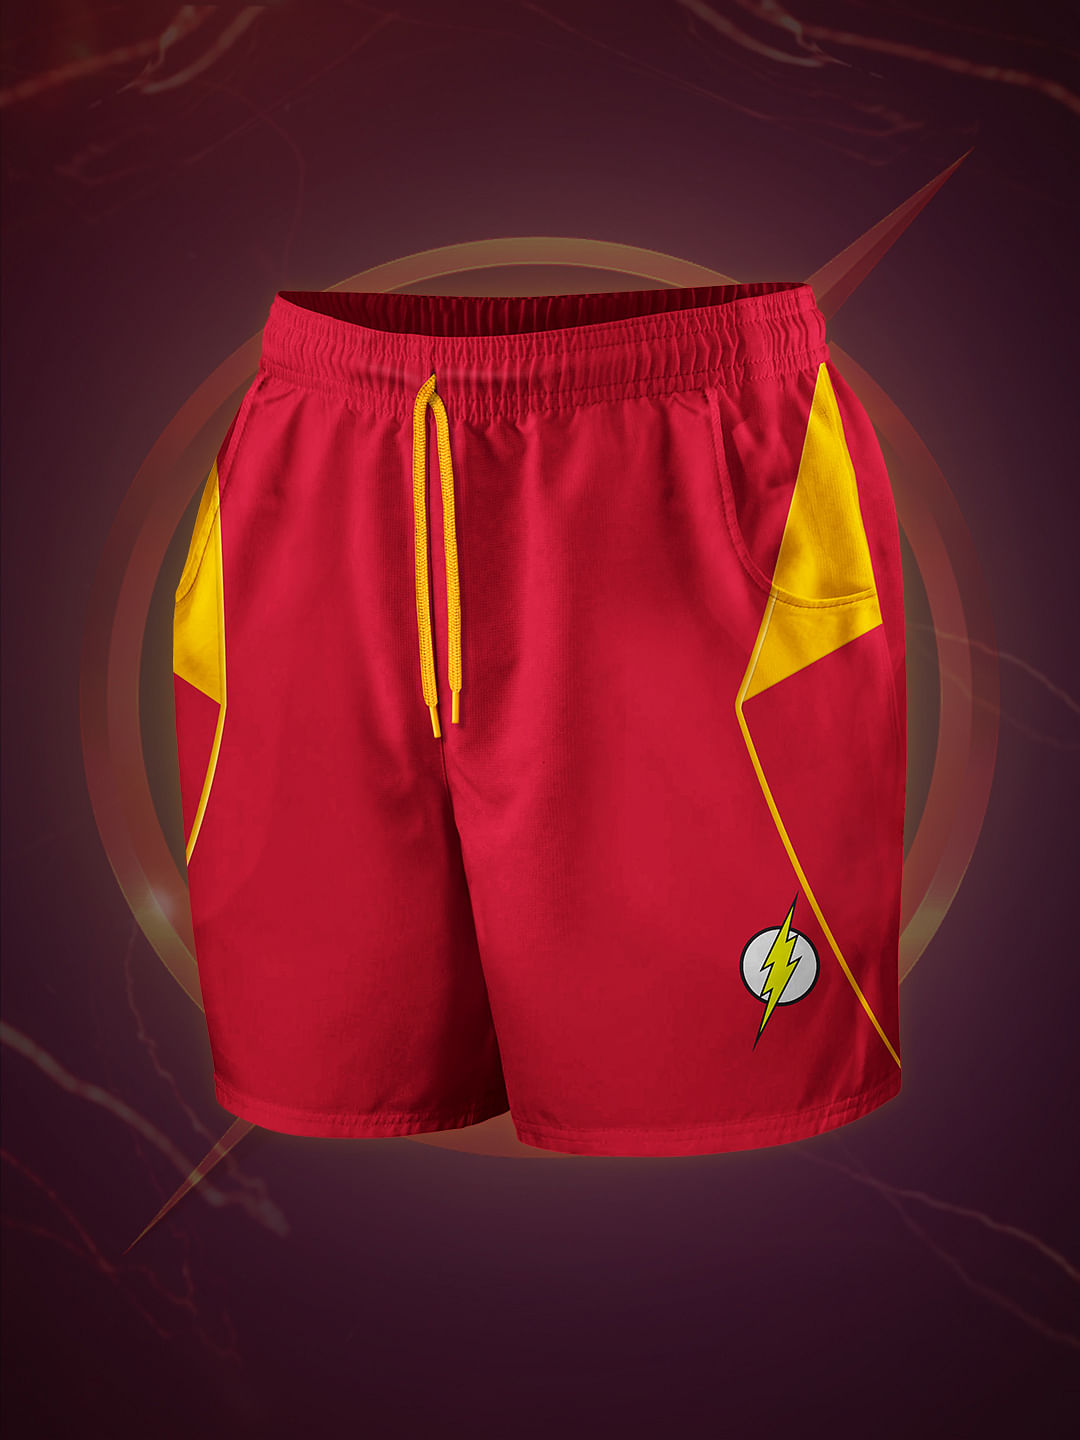 Buy The Flash Sweatshorts at The Souled Store